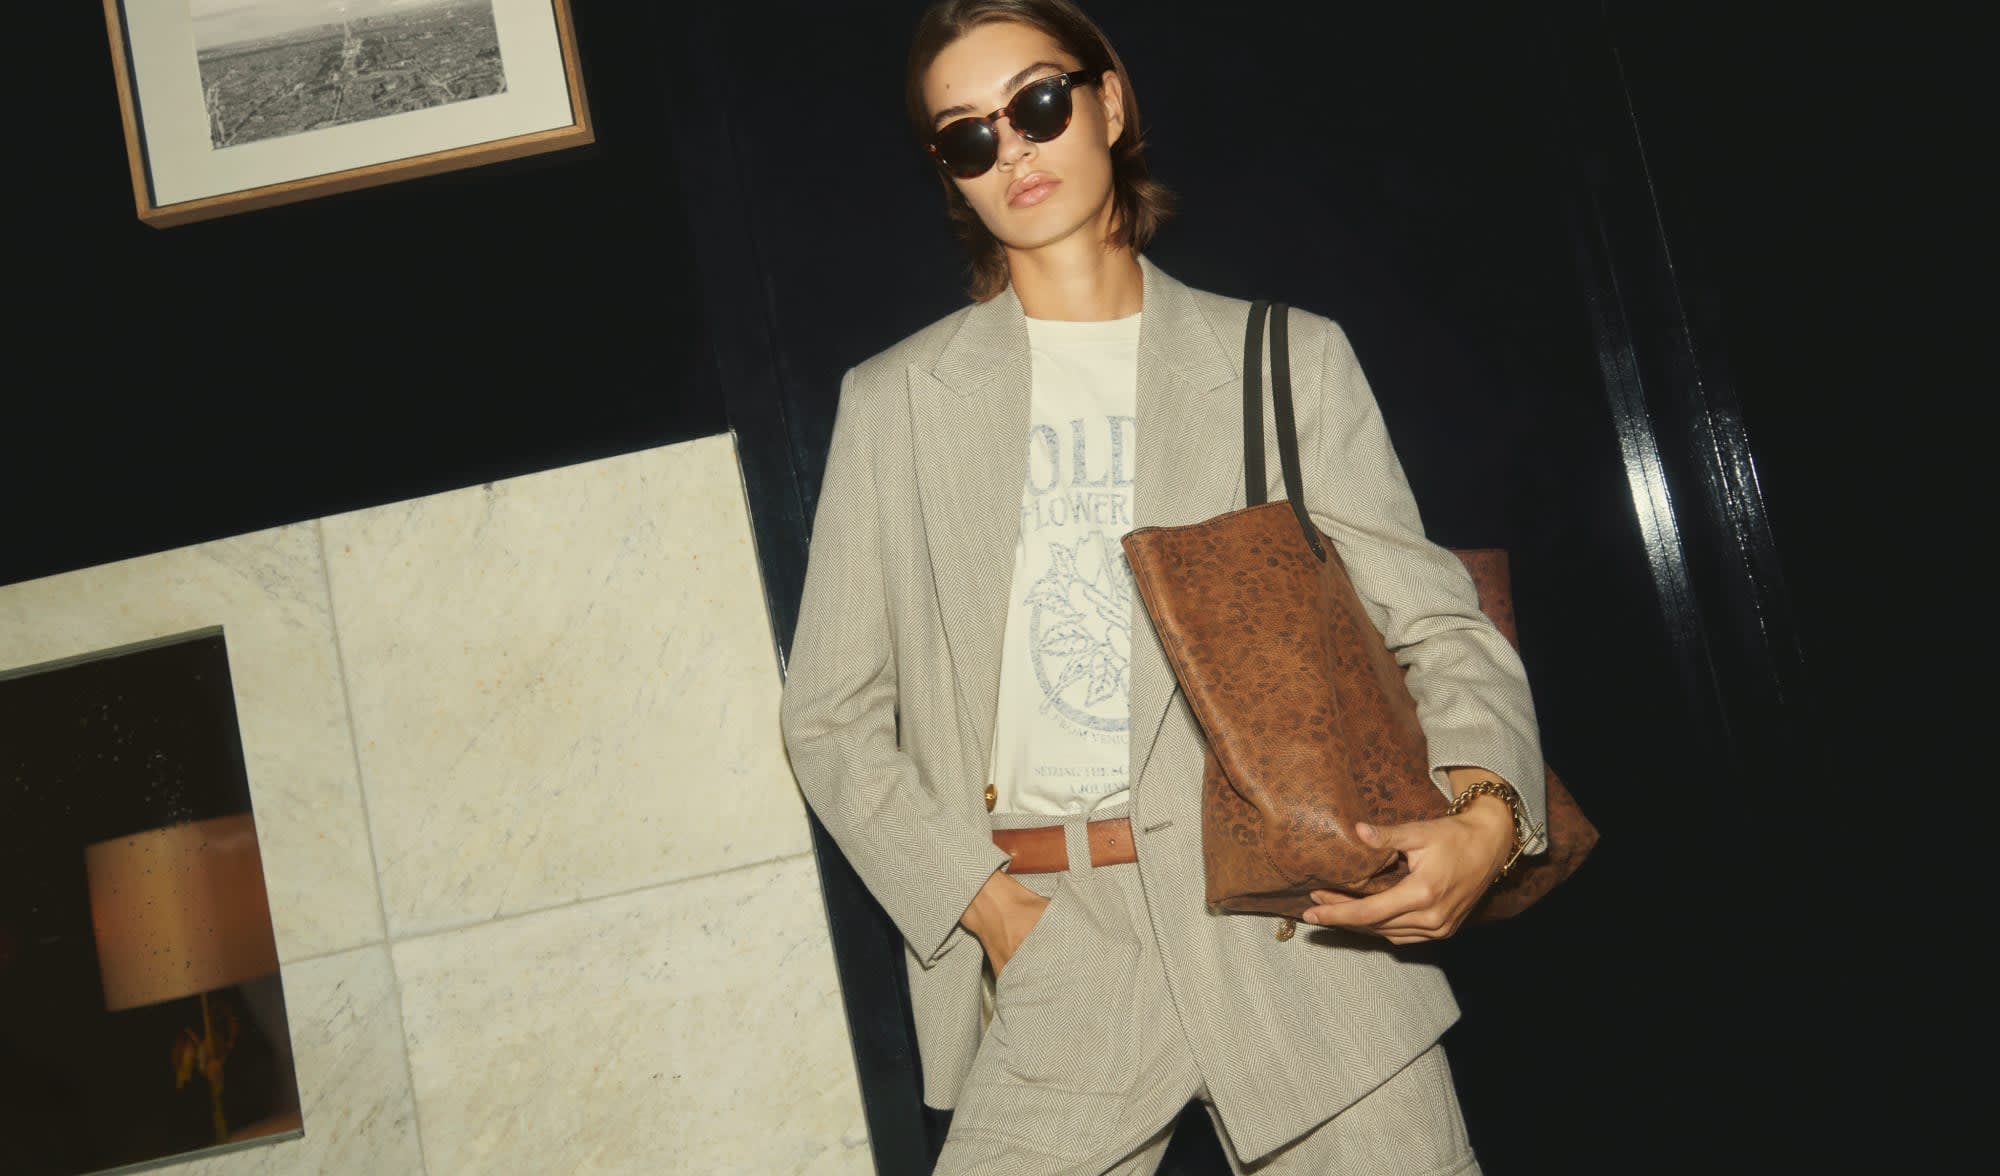 short-hair-woman-with-sunglasses-wearing-white-t-shirt-and-beige-suit-holding-brown-handbag